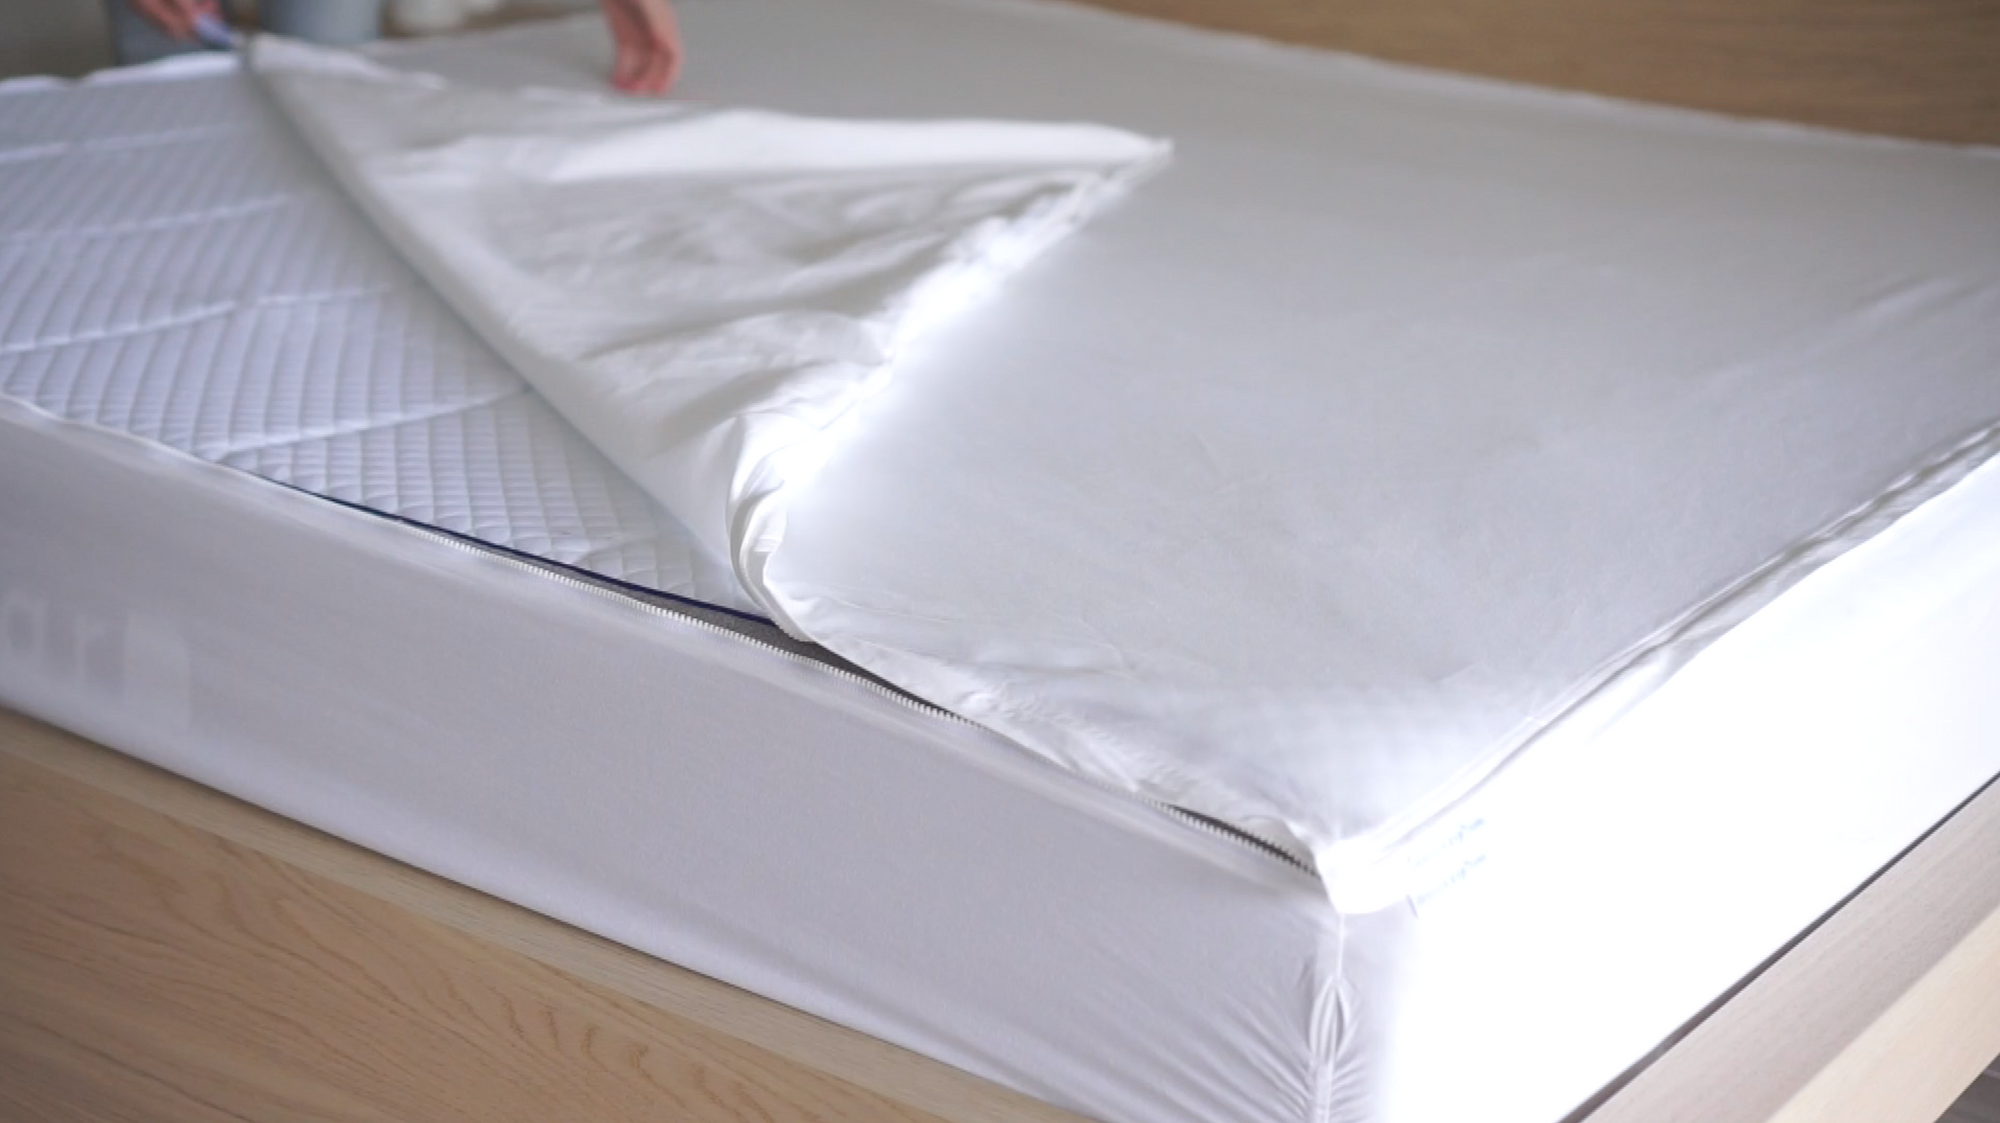 Why QuickZip Fits Better Than Any Other Sheet